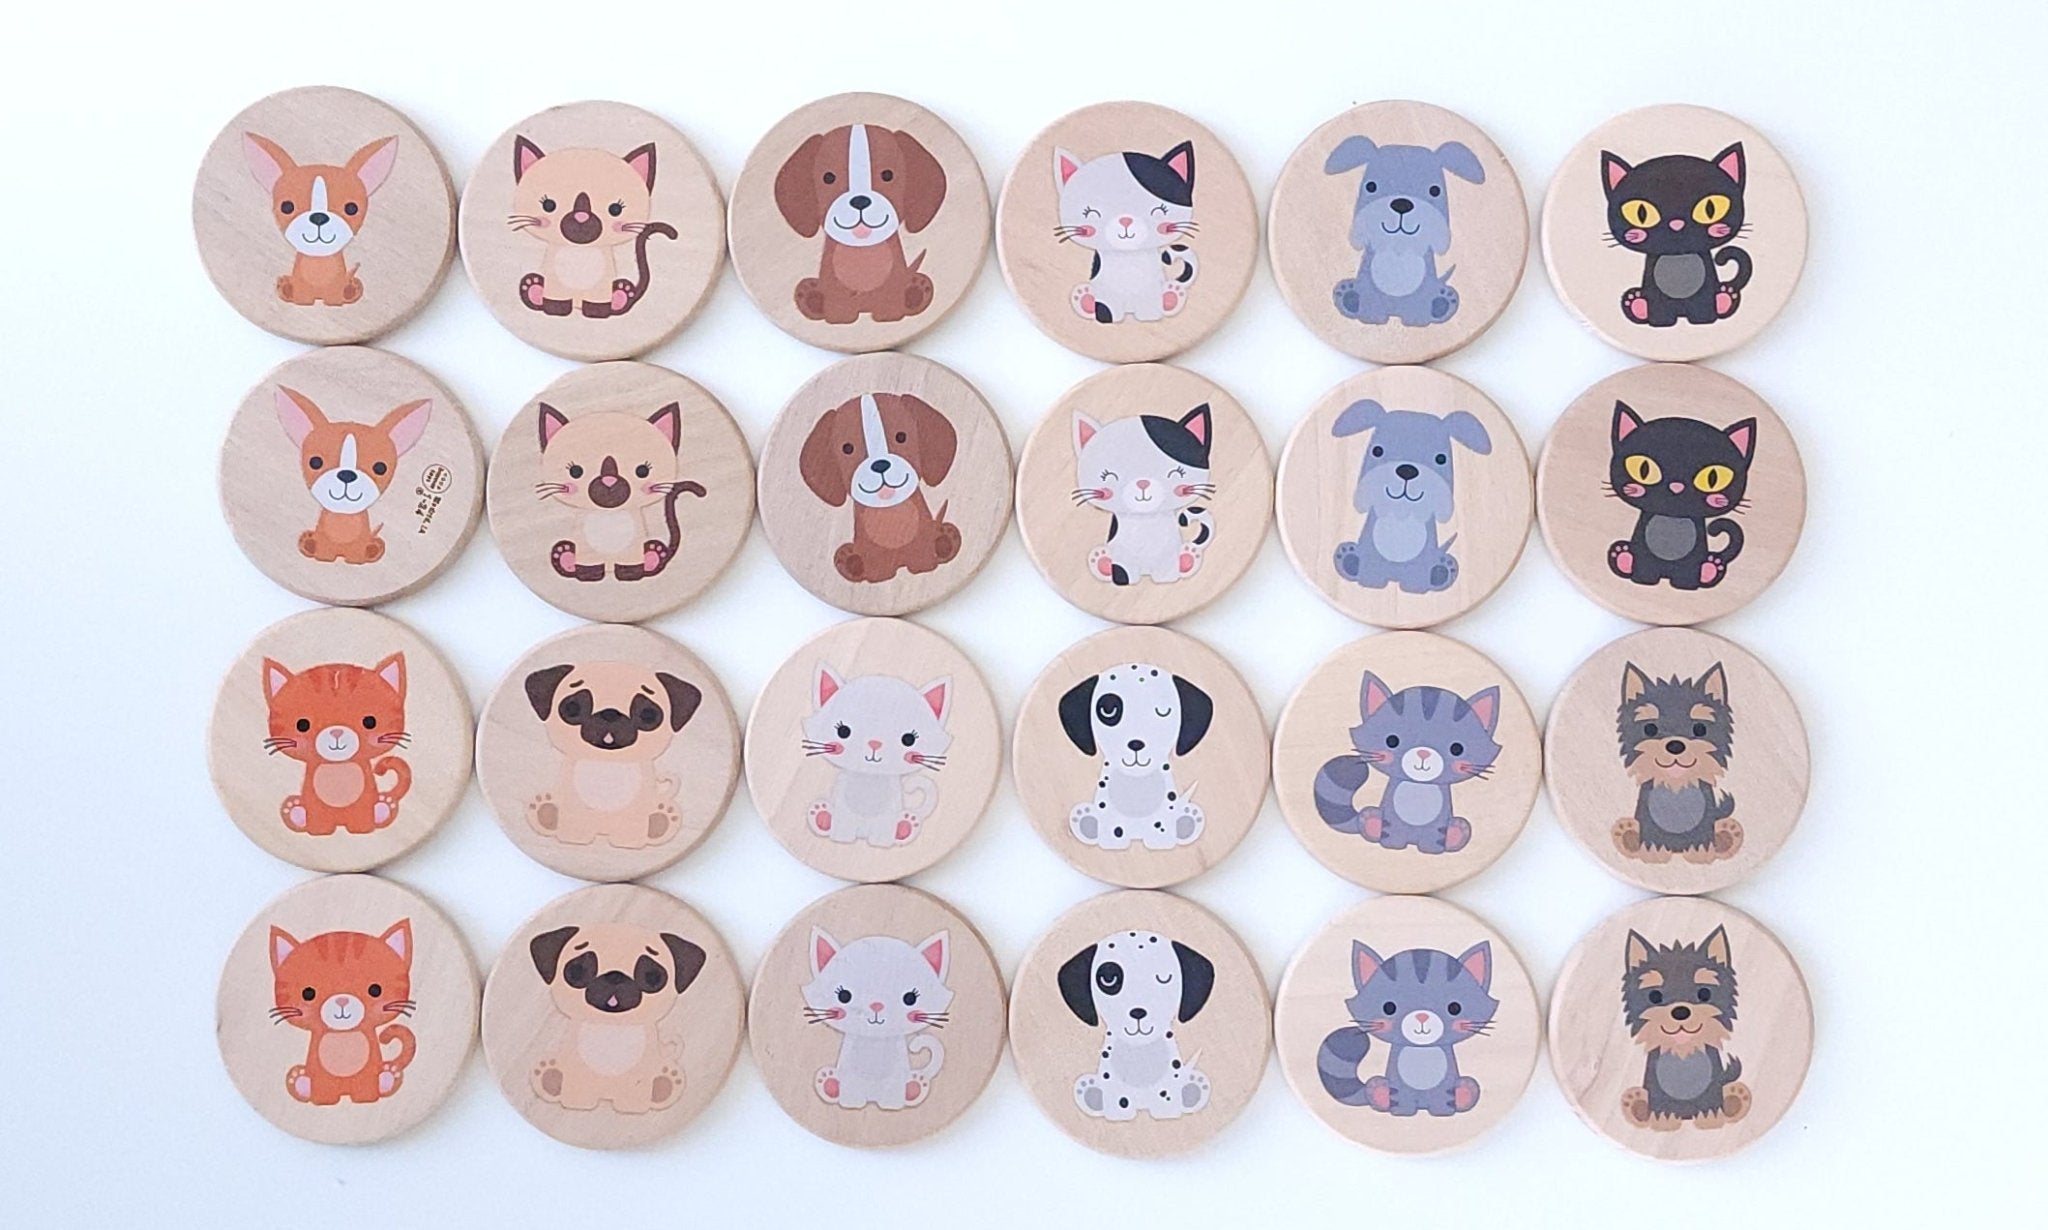 Dogs + Cats Matching Tiles